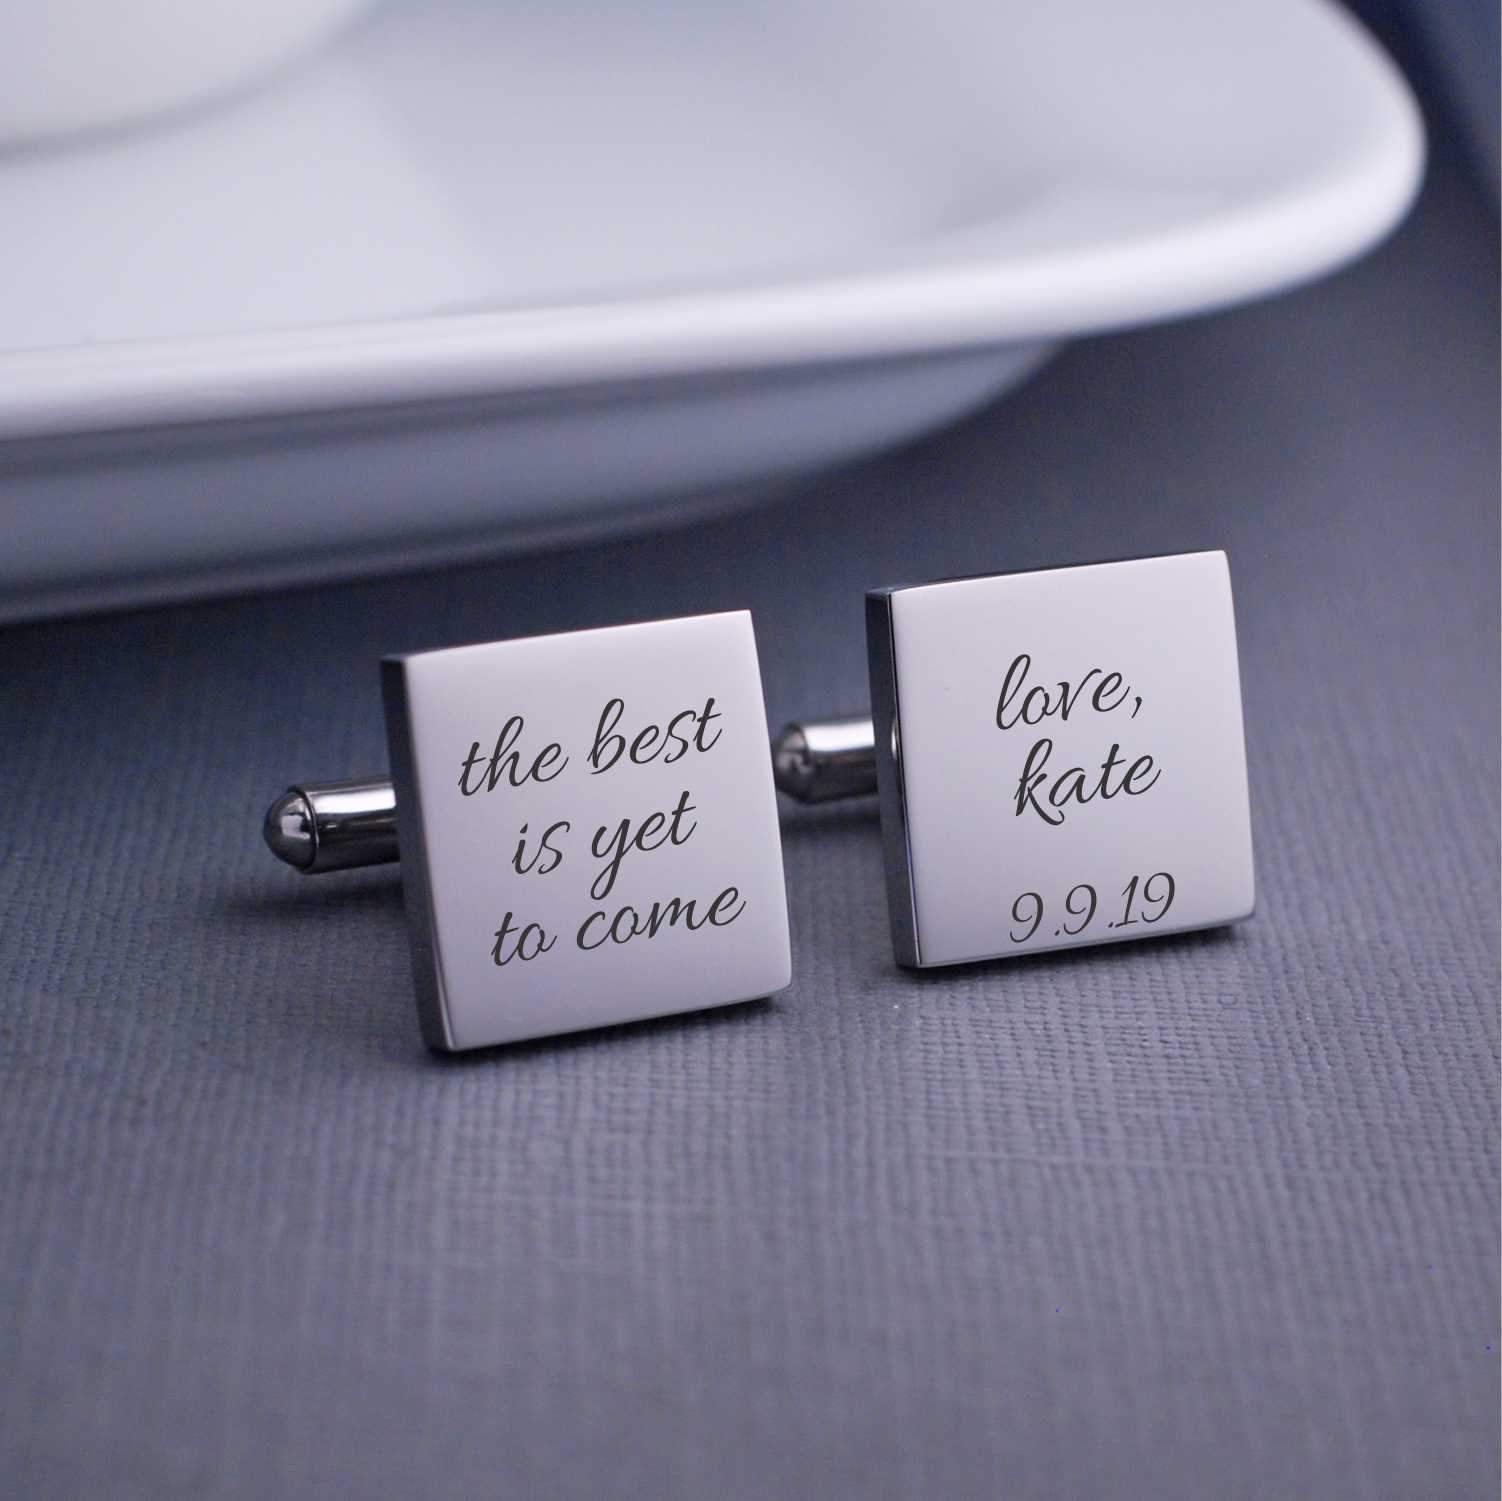 The Best is Yet to Come Cufflinks – Cuff Links – Love, Georgie